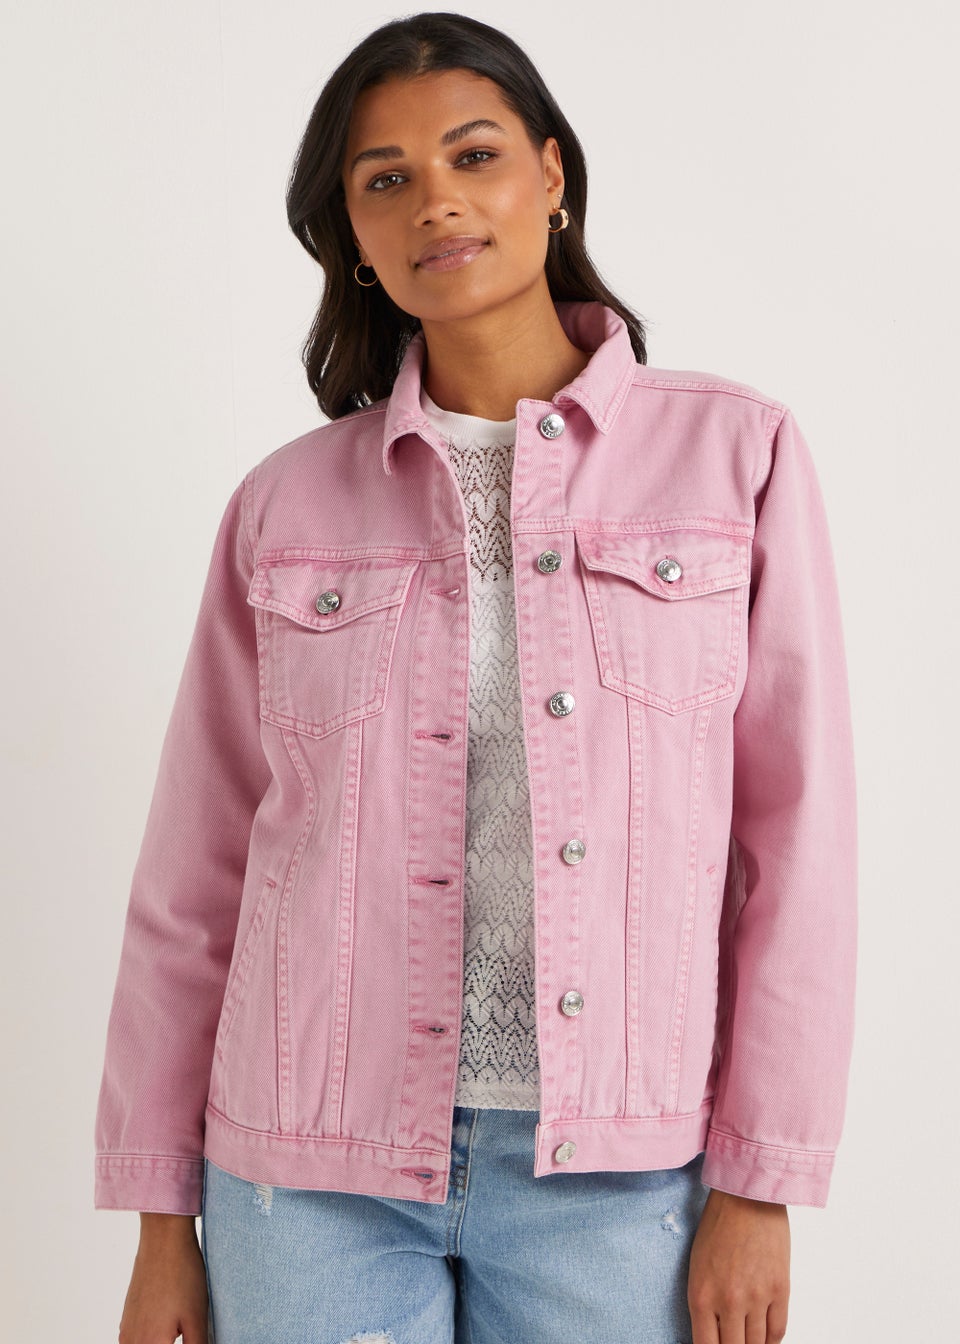 Styling a Pink Jean Jacket Outfit as Inspiration from Grease